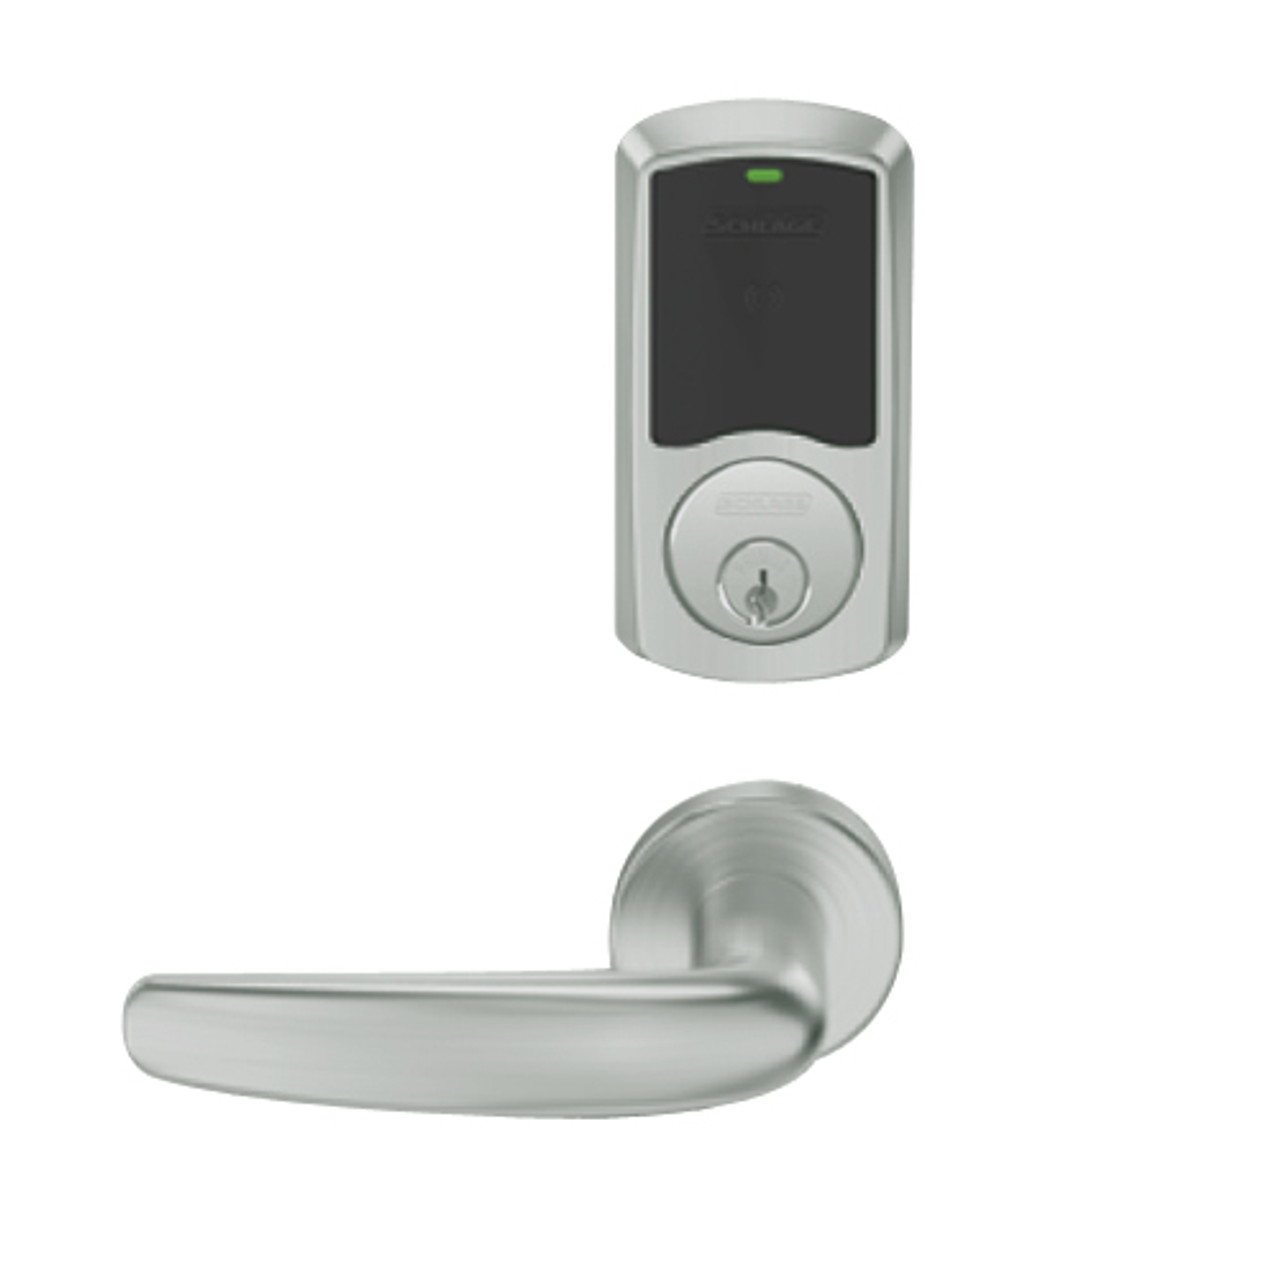 LEMB-GRW-P-07-619-00A Schlage Privacy/Office Wireless Greenwich Mortise Lock with Push Button & LED Indicator and Athens Lever in Satin Nickel